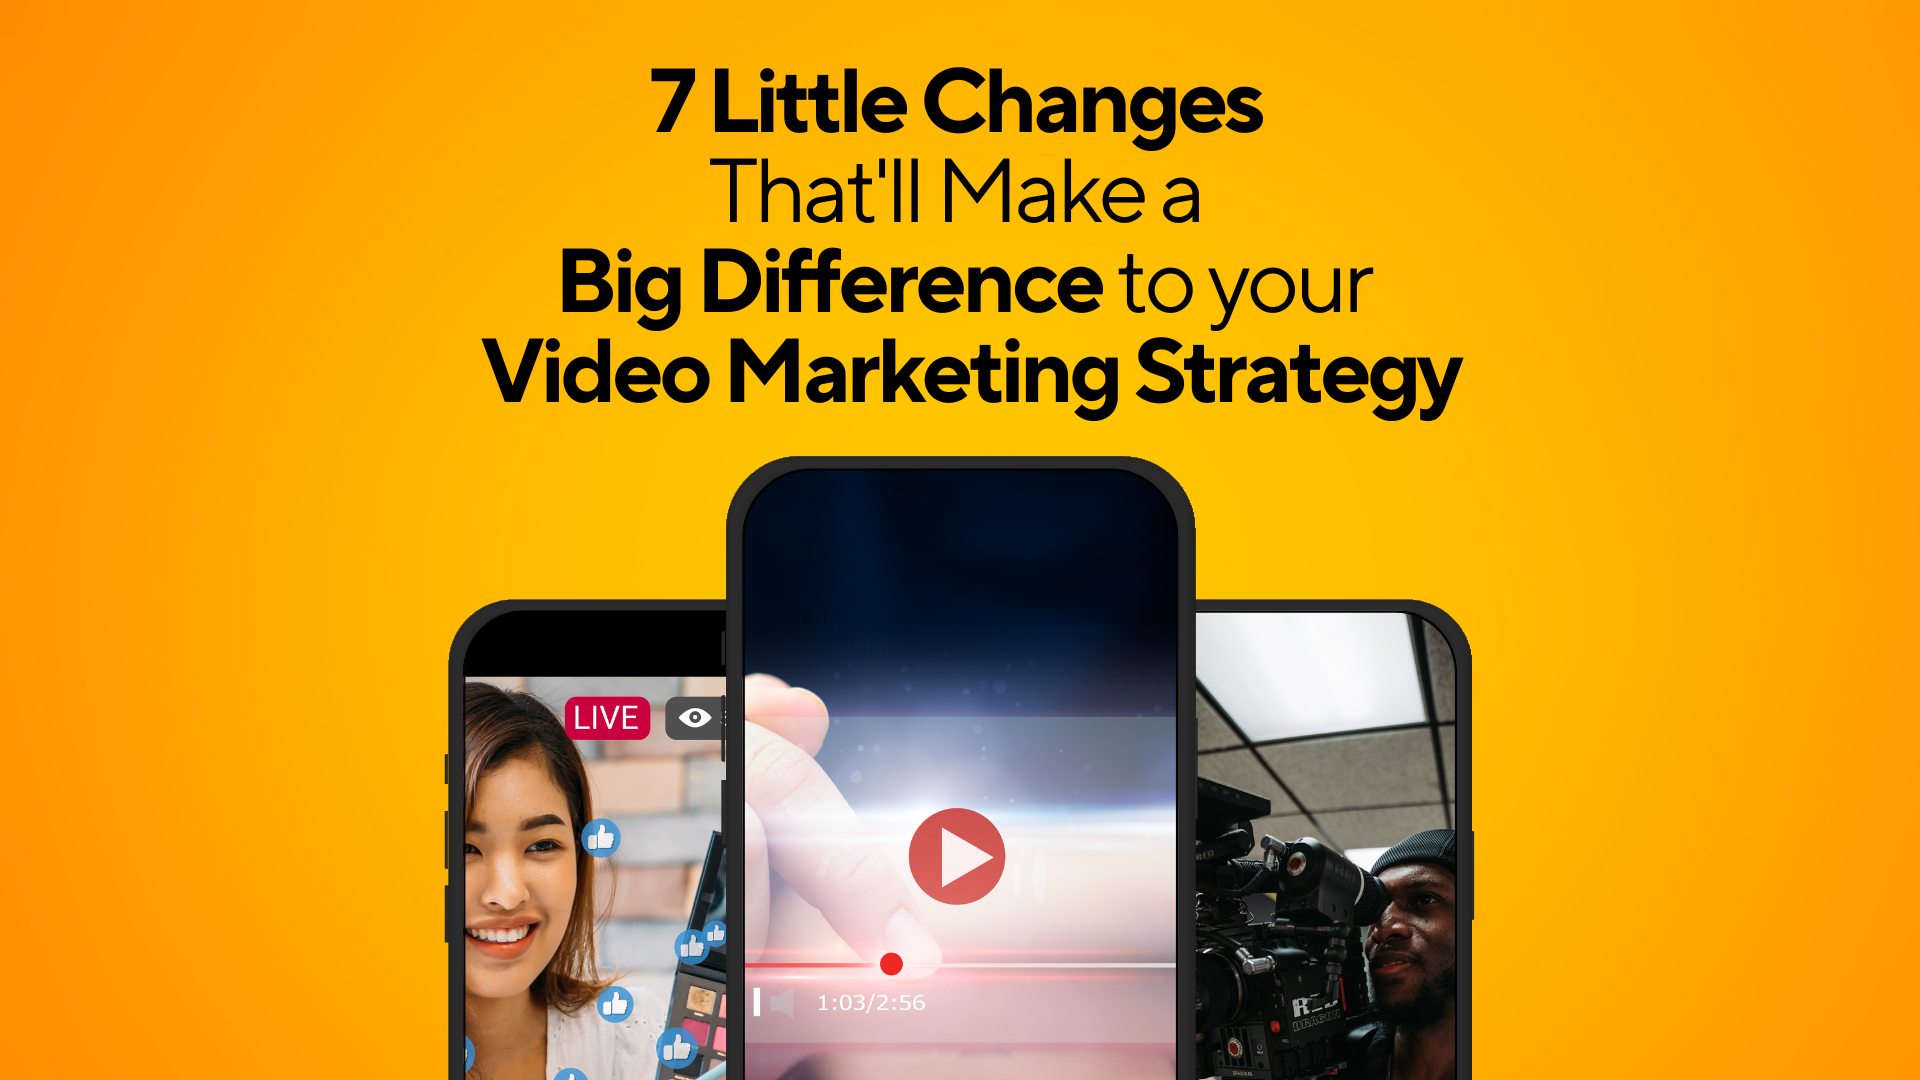 7 Changes that will make a big difference to your Video Marketing Strategy